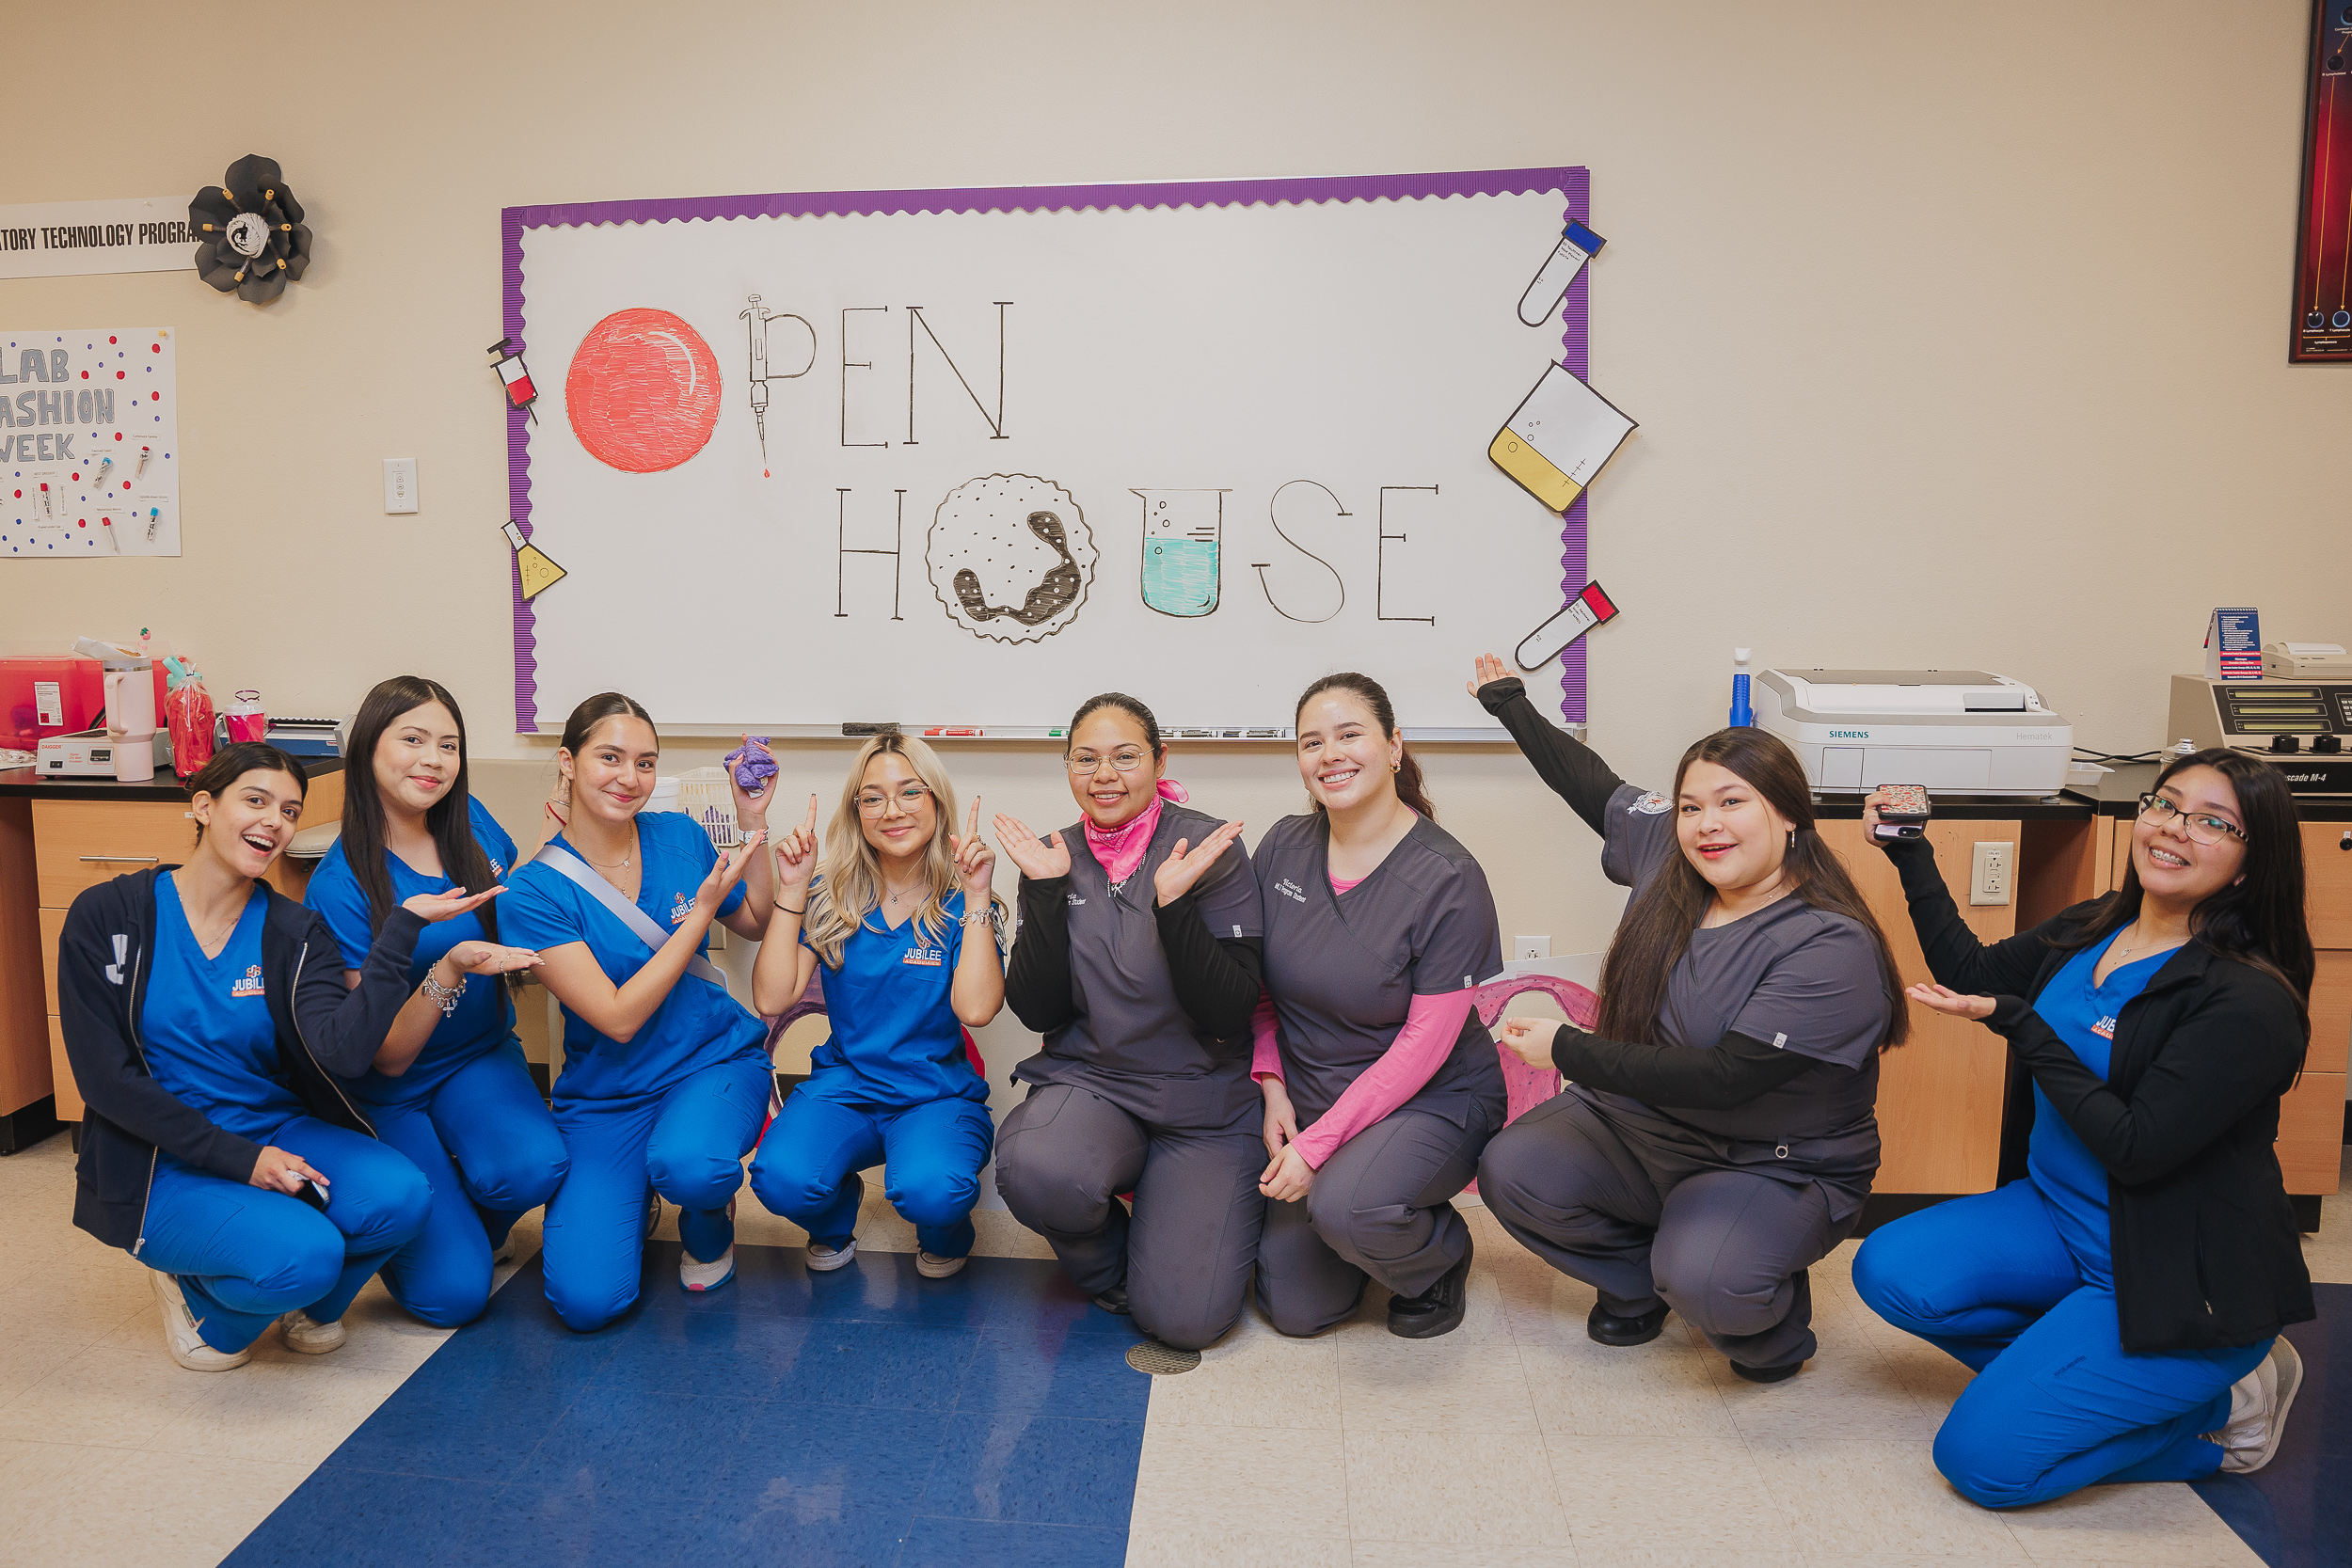 Texas Southmost College Medical Laboratory Technology program hosted an open house on April 18, 2024 at the ITEC Center to showcase the program, faculty, students, and training labs for an exciting career in the MLT field.